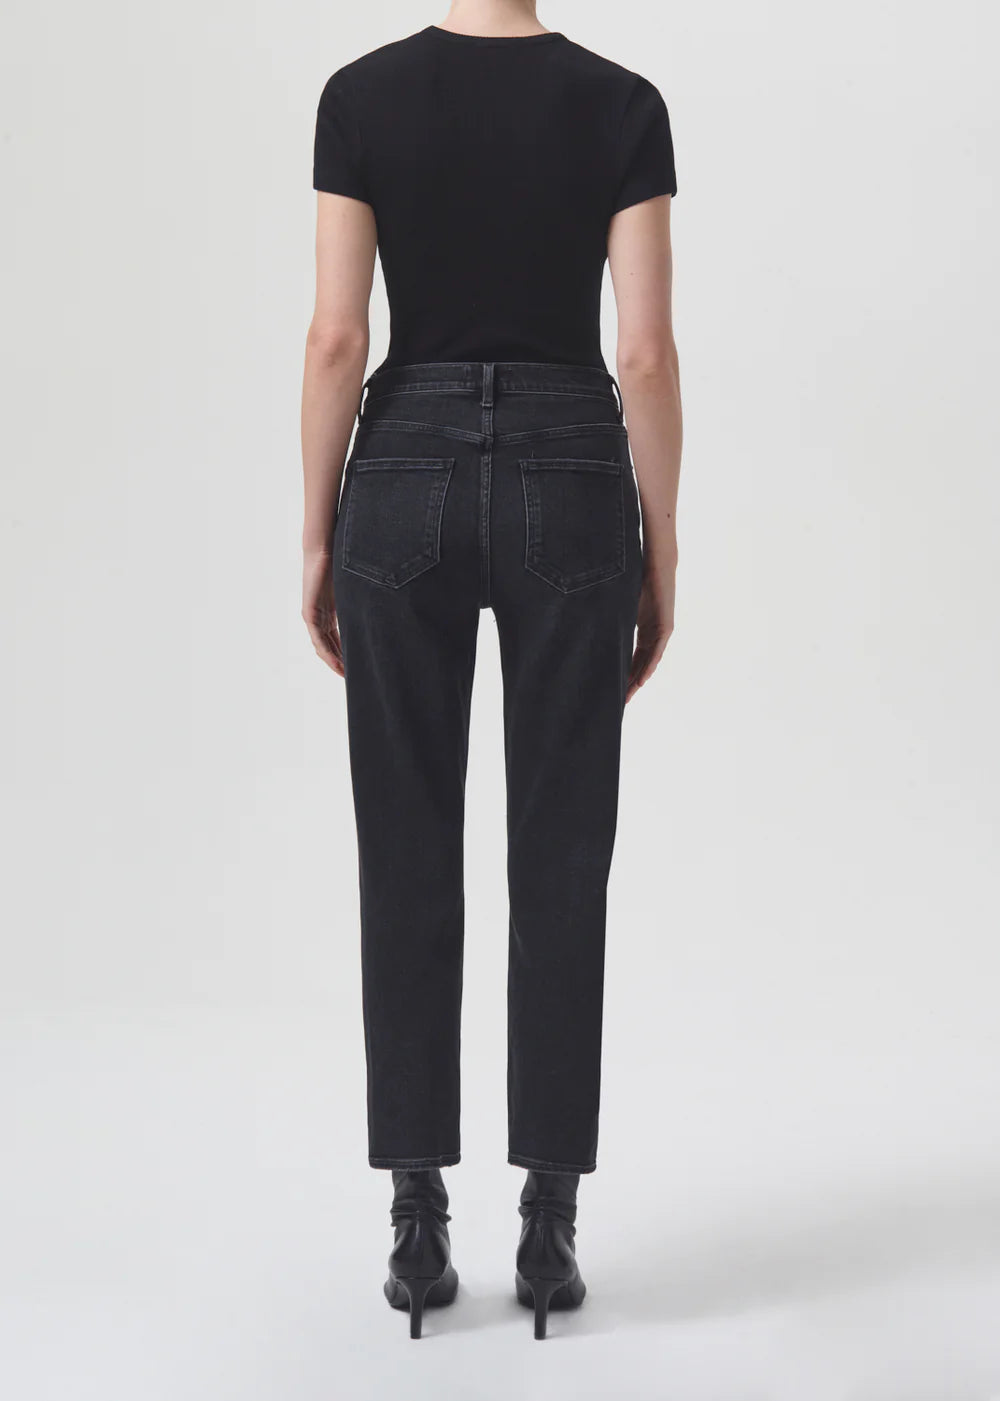 The back view of a woman wearing AGOLDE's Riley Straight Crop - Panoramic black jeans.